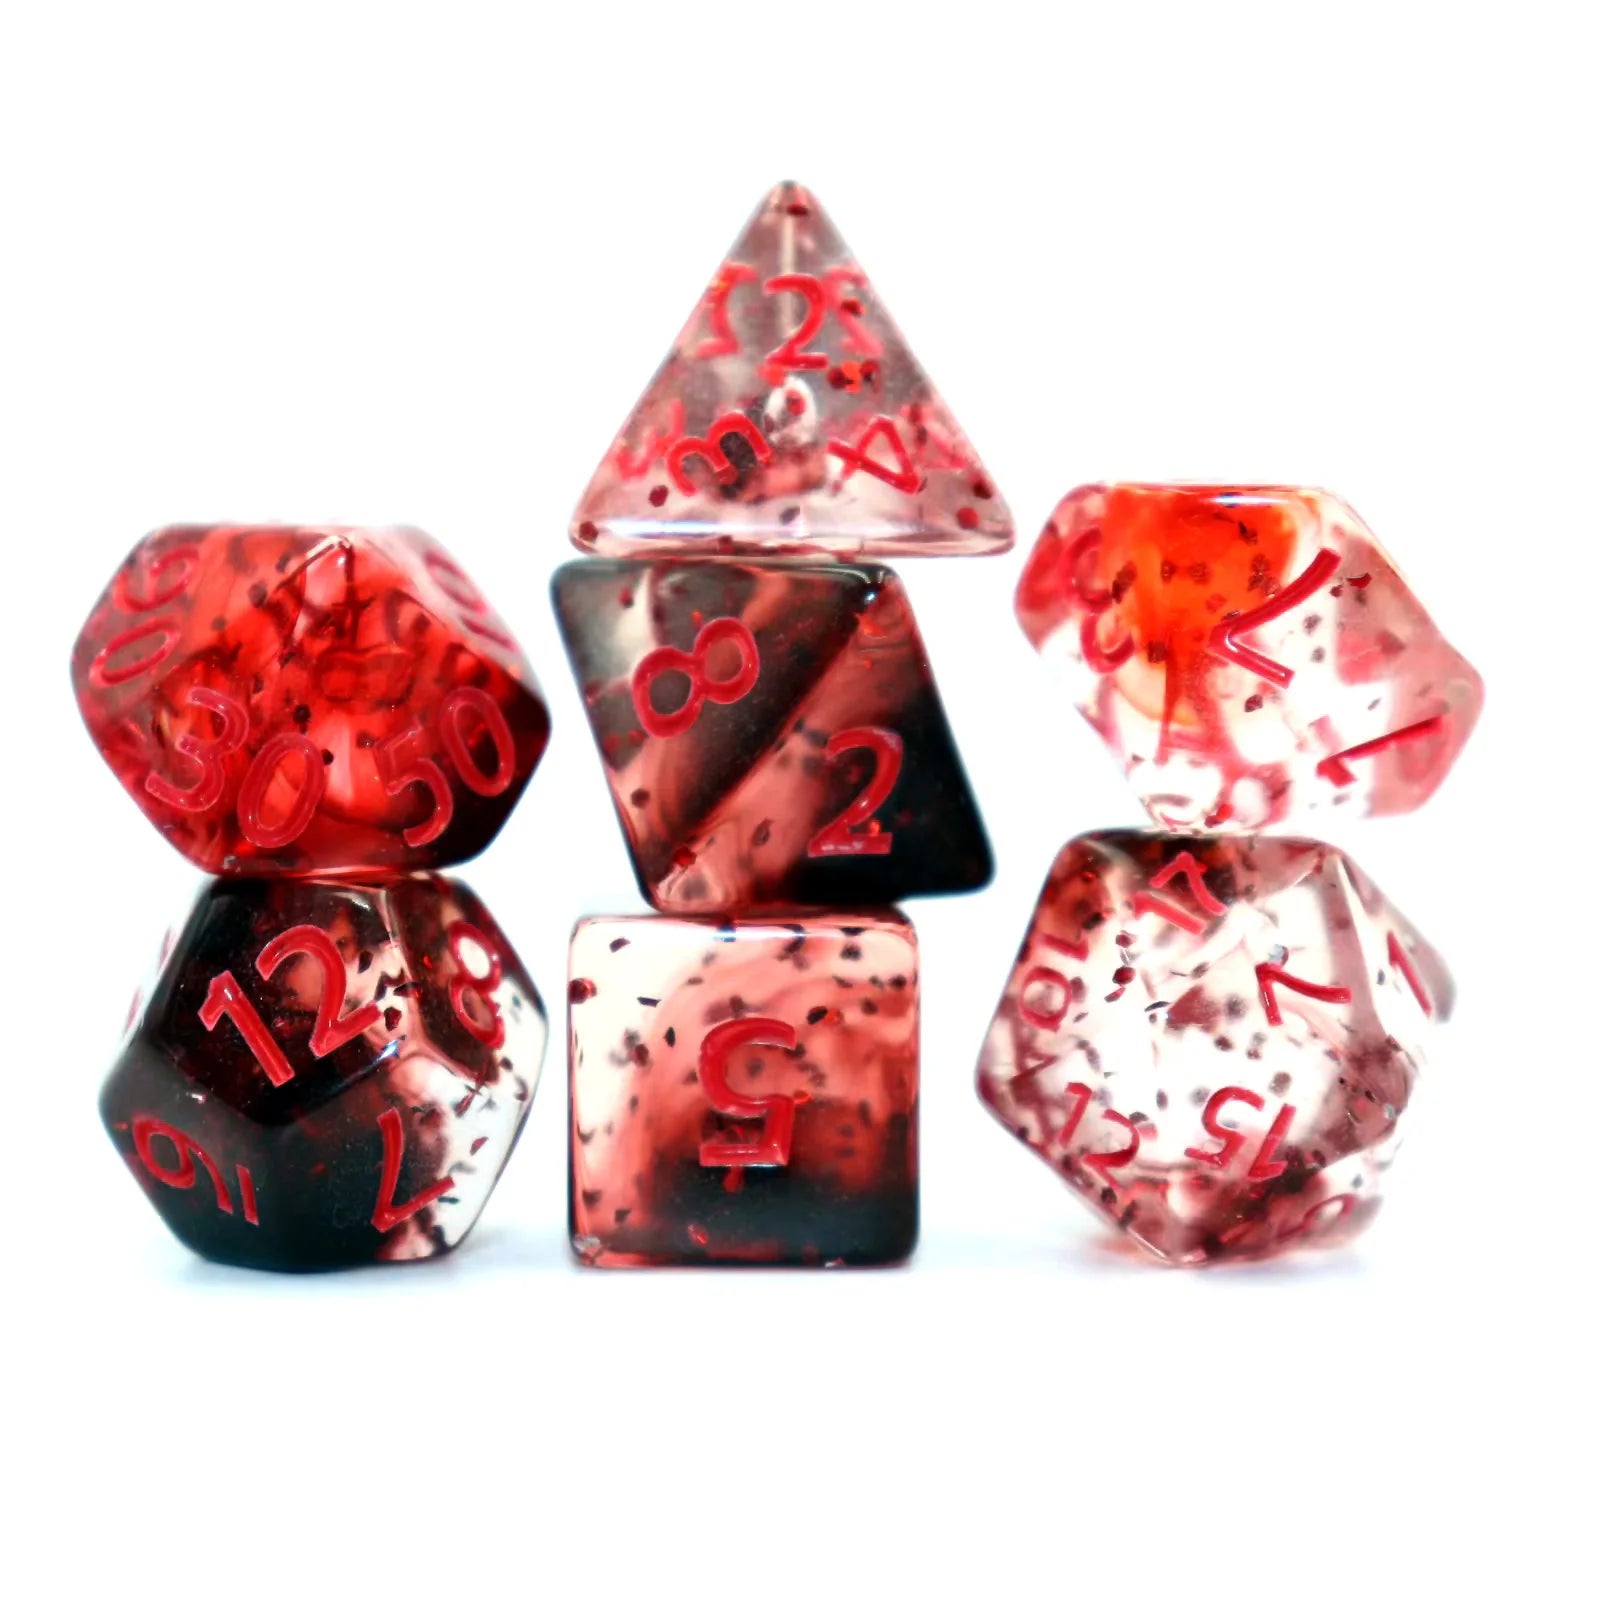 7pcs Set Crystal Style DND Dice Set, Polyhedral Table Game Dice Role-Playing RPG Dice With Box Red